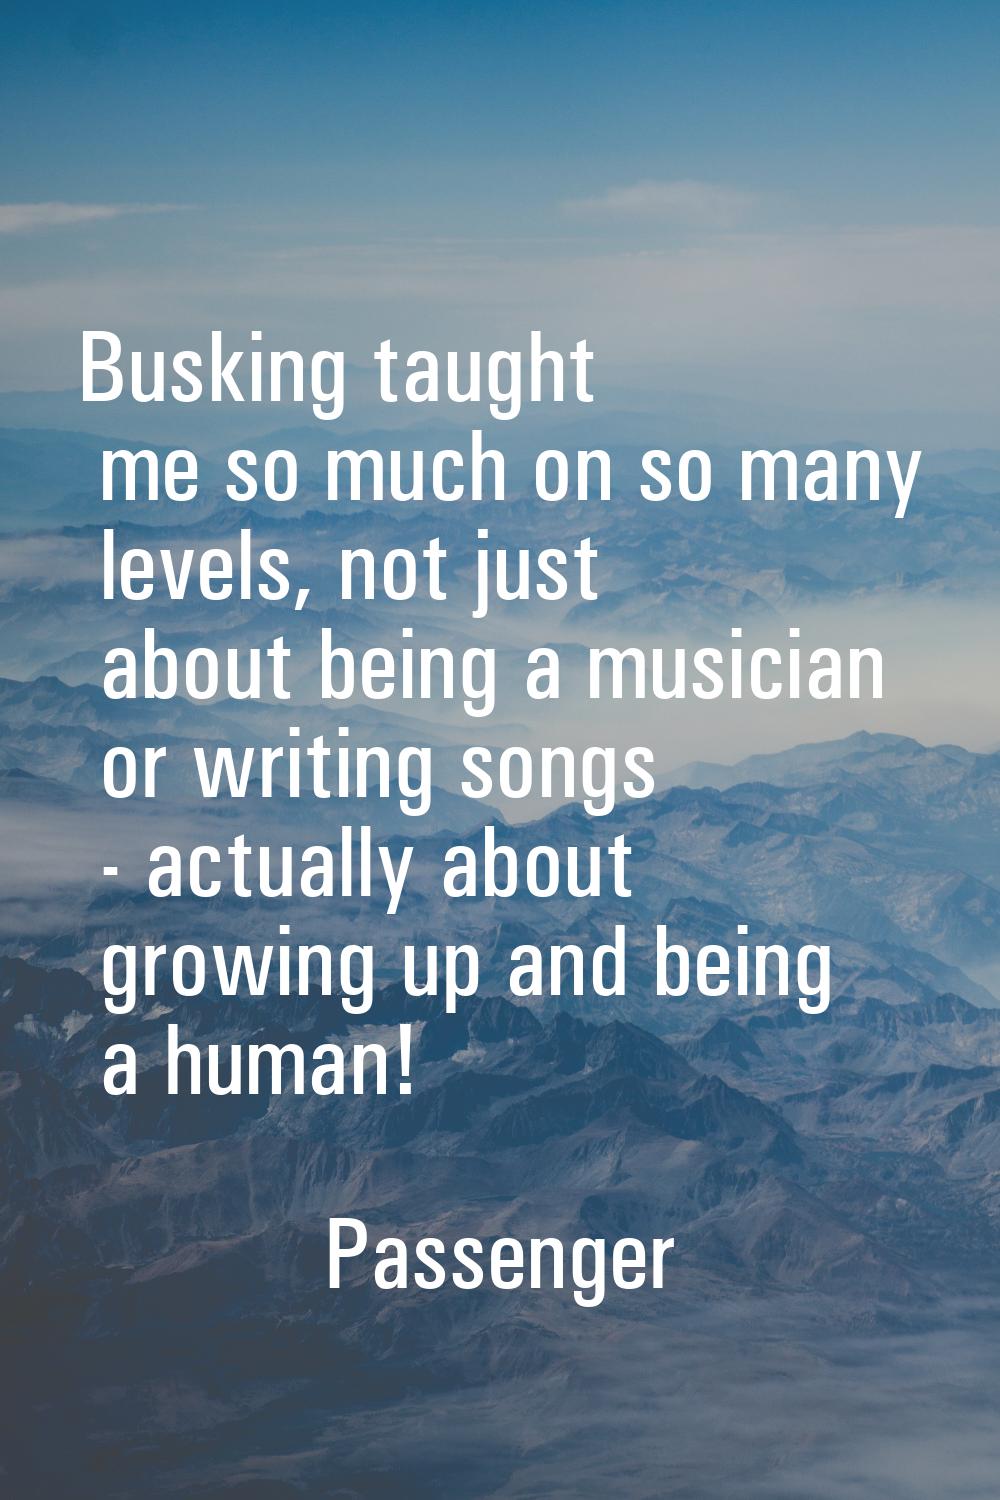 Busking taught me so much on so many levels, not just about being a musician or writing songs - act